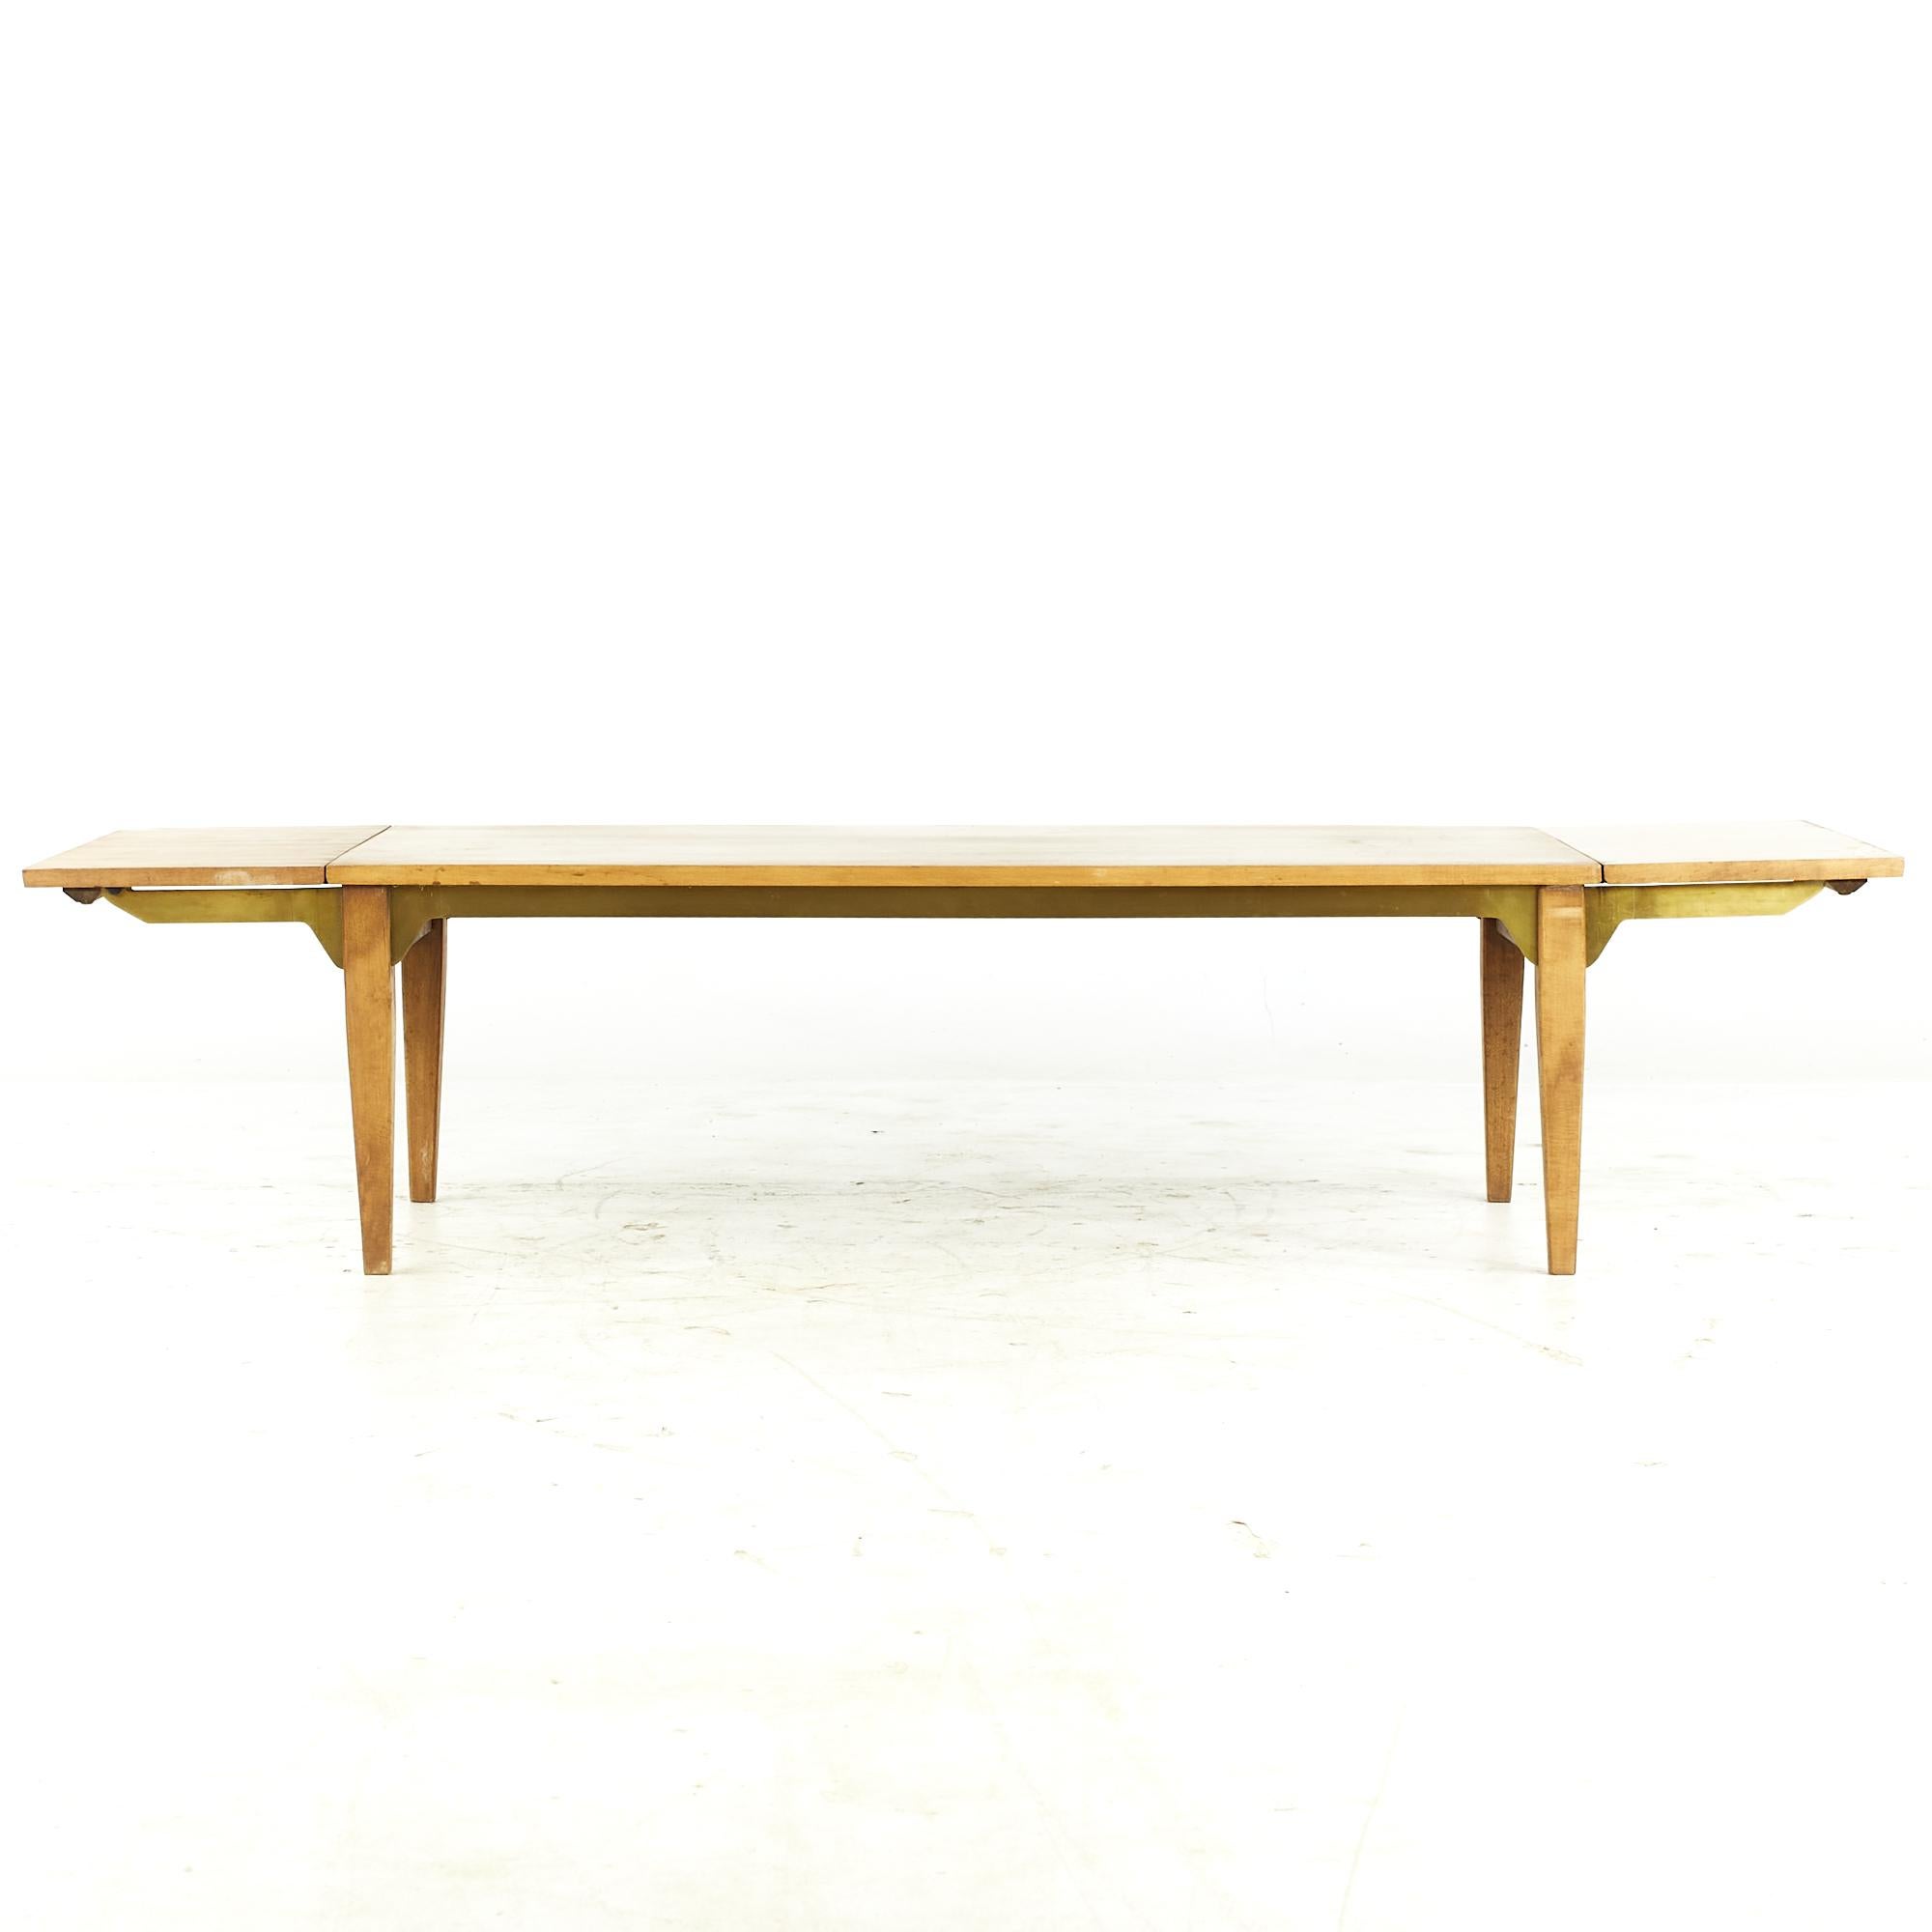 Milo Baughman for Murray midcentury Expanding Bench Brass Coffee Table

This coffee table measures: 46 wide x 22 deep x 15.25 inches high; each leaf is 11 inches wide, making a maximum table width of 68 inches when both leaves are expanded

All